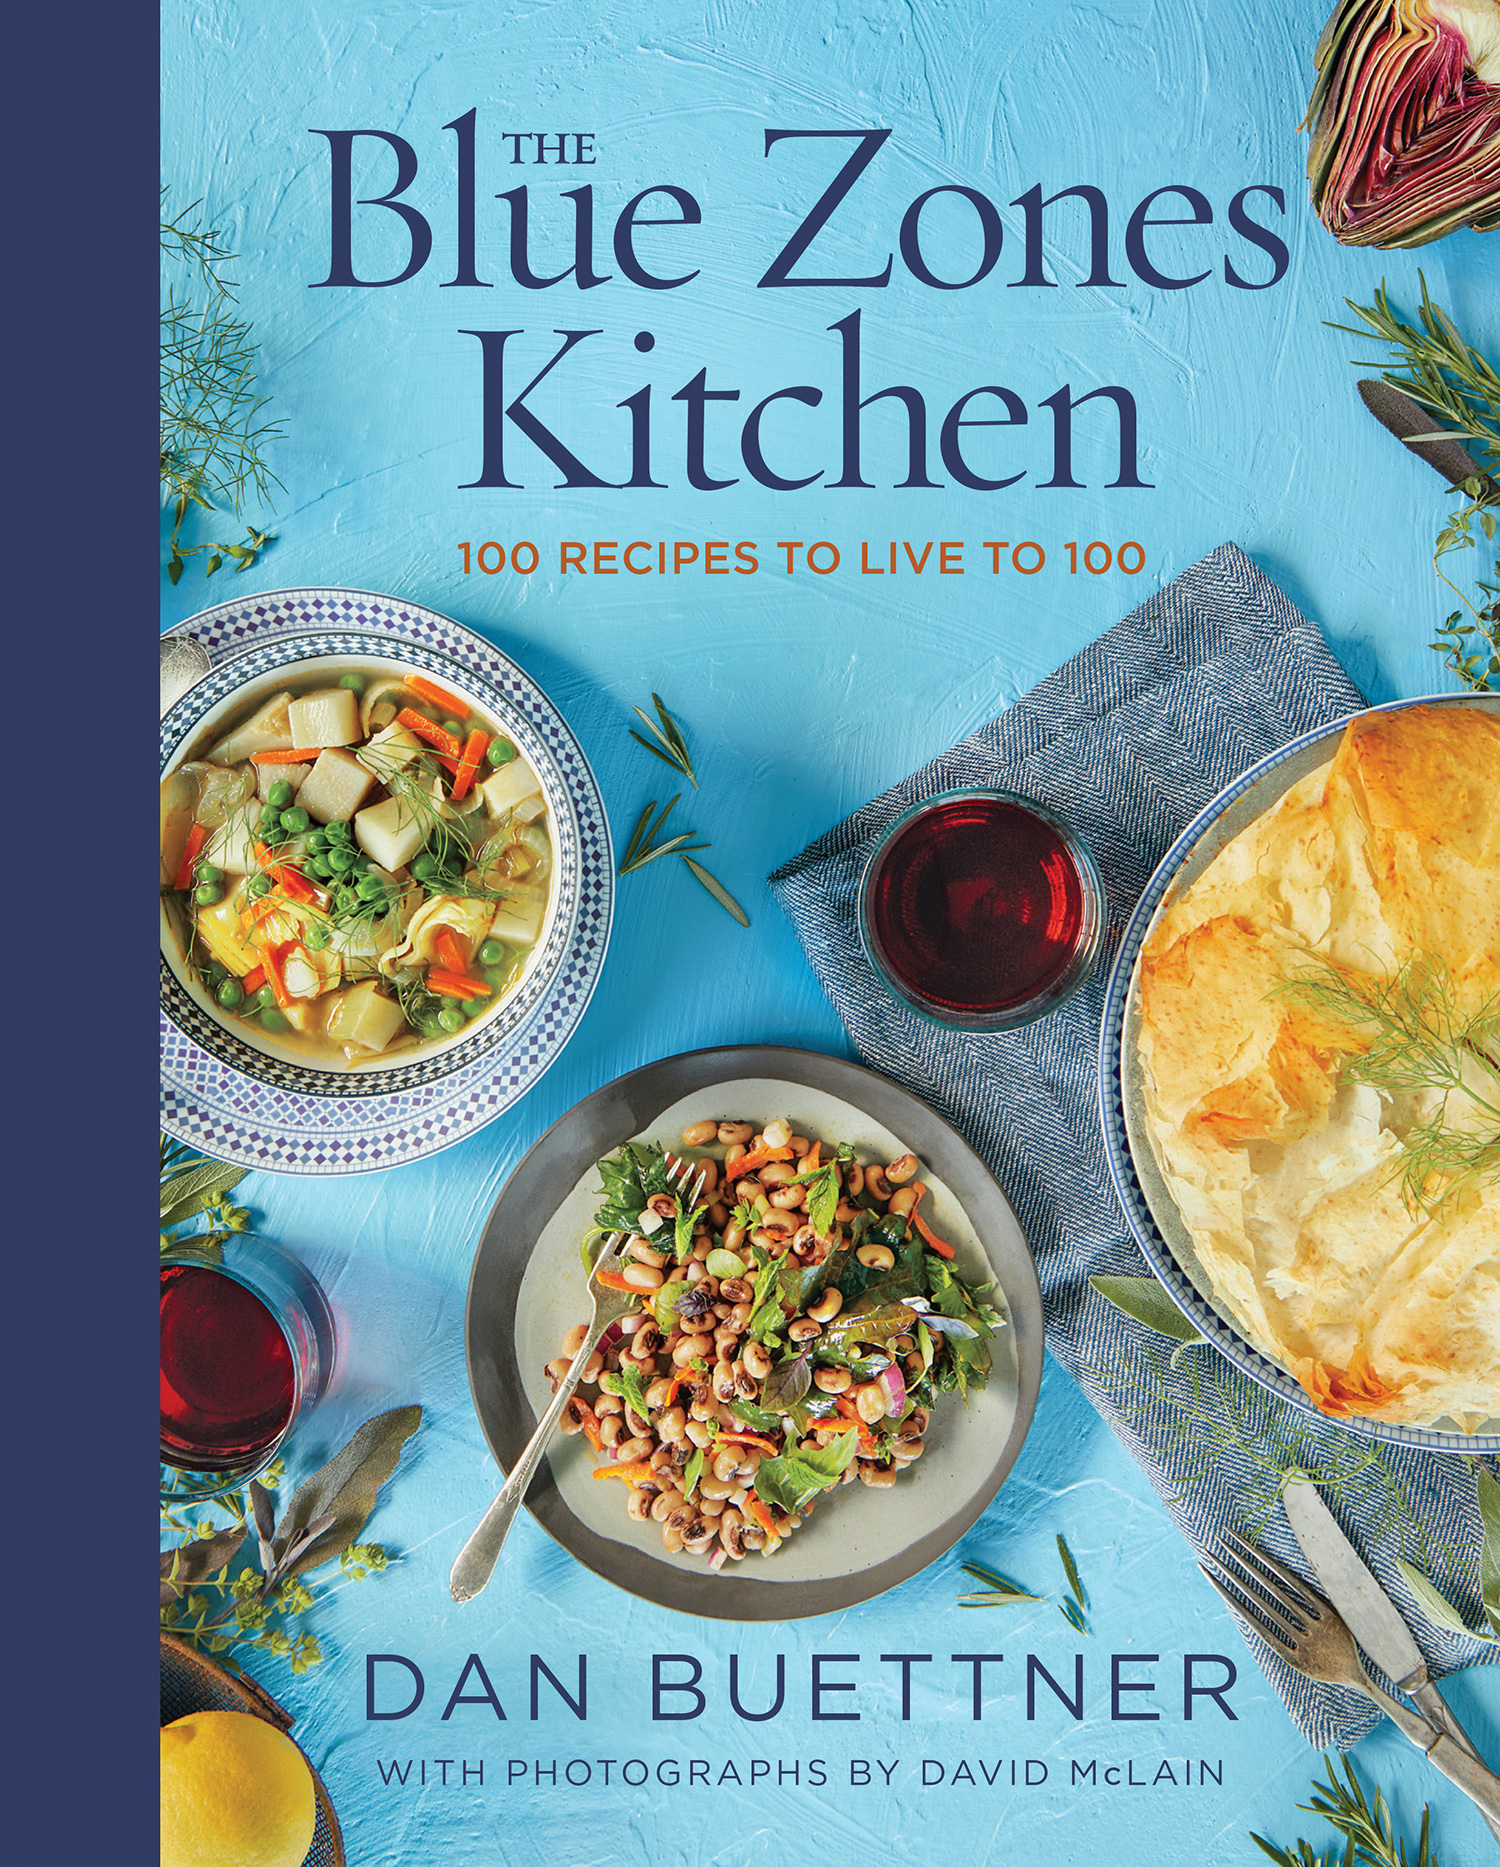 The Blue Zones Kitchen Eating and Cooking Like the Worlds Healthiest People - photo 1